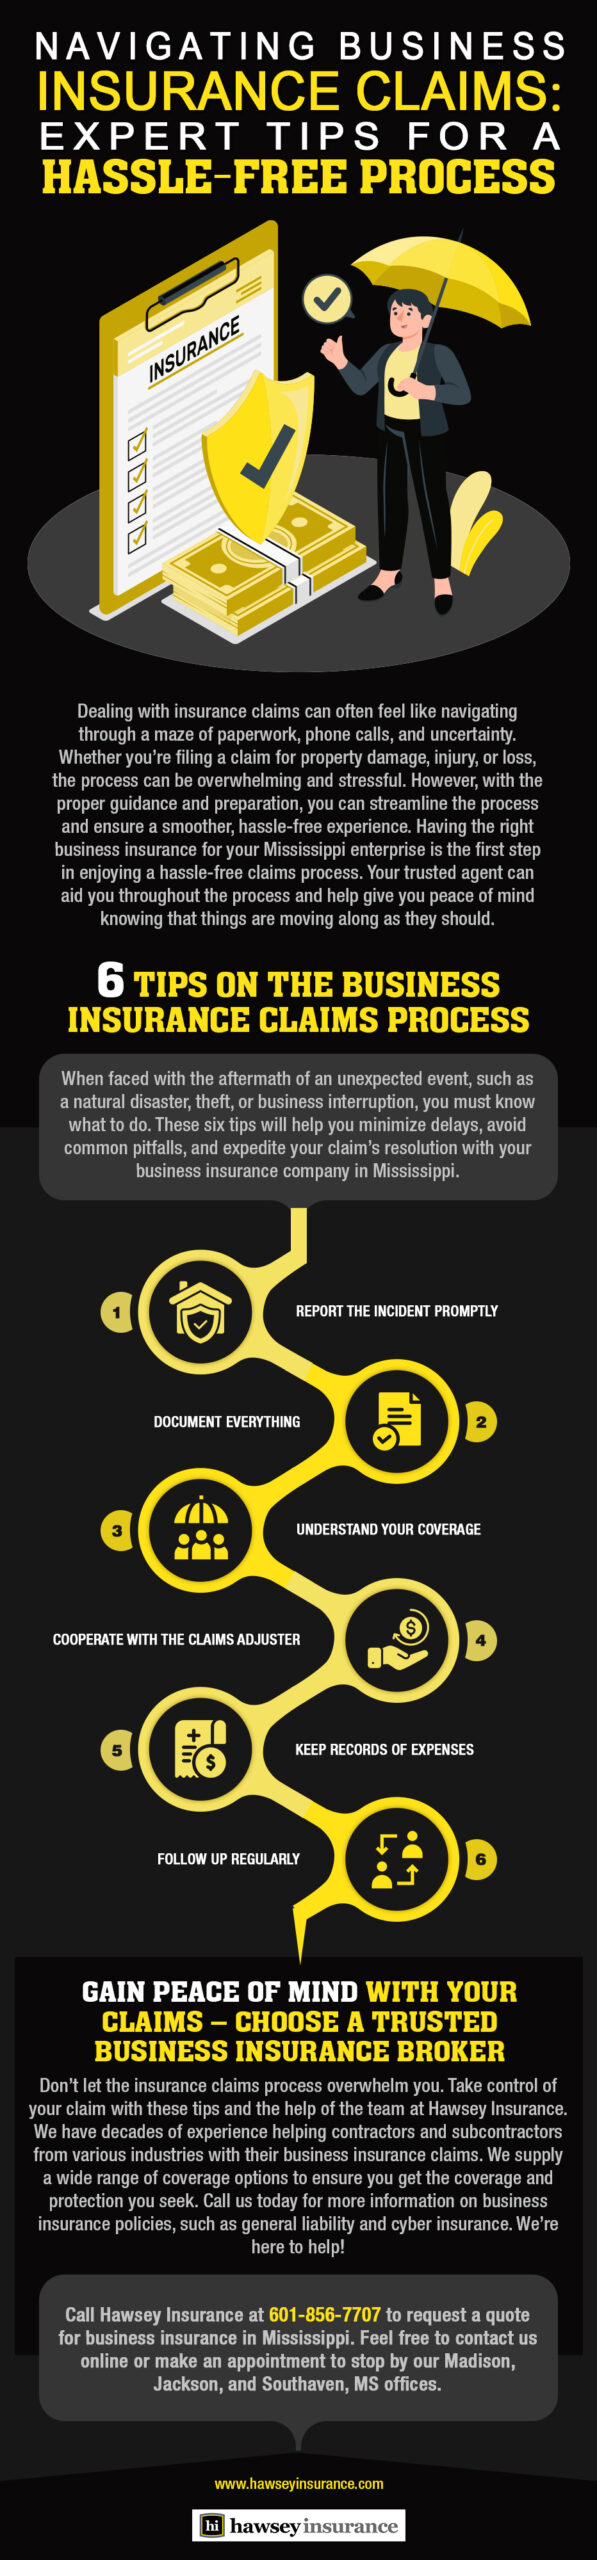 Navigating Business Insurance Claims: Expert Tips for a Hassle-Free Process